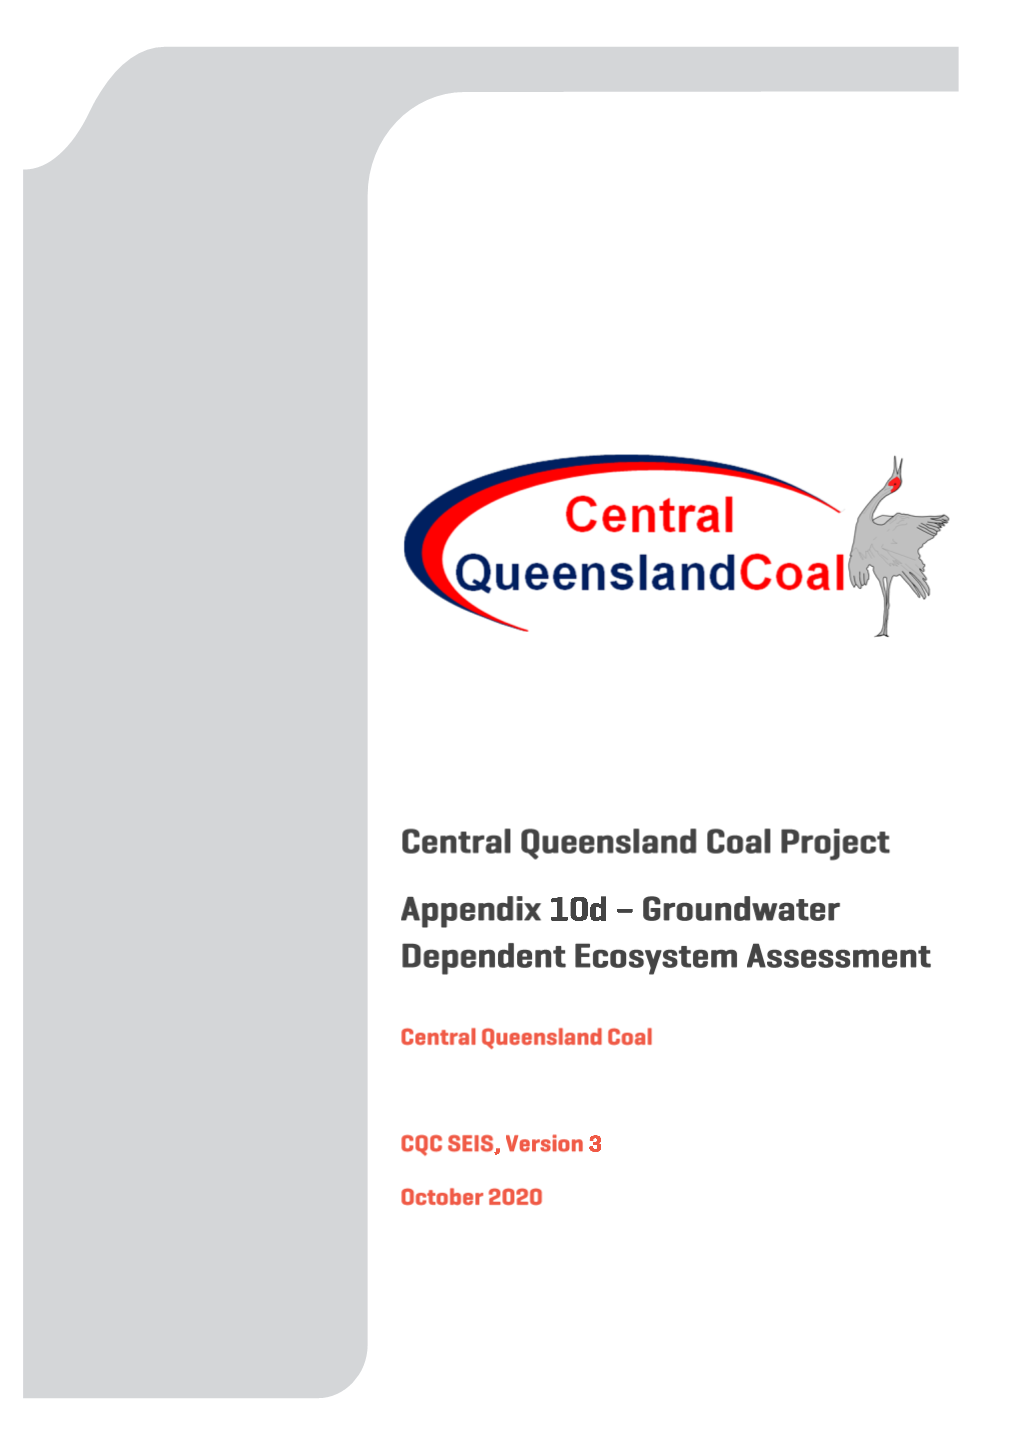 Groundwater Dependent Ecosystem Assessment Central Queensland Coal